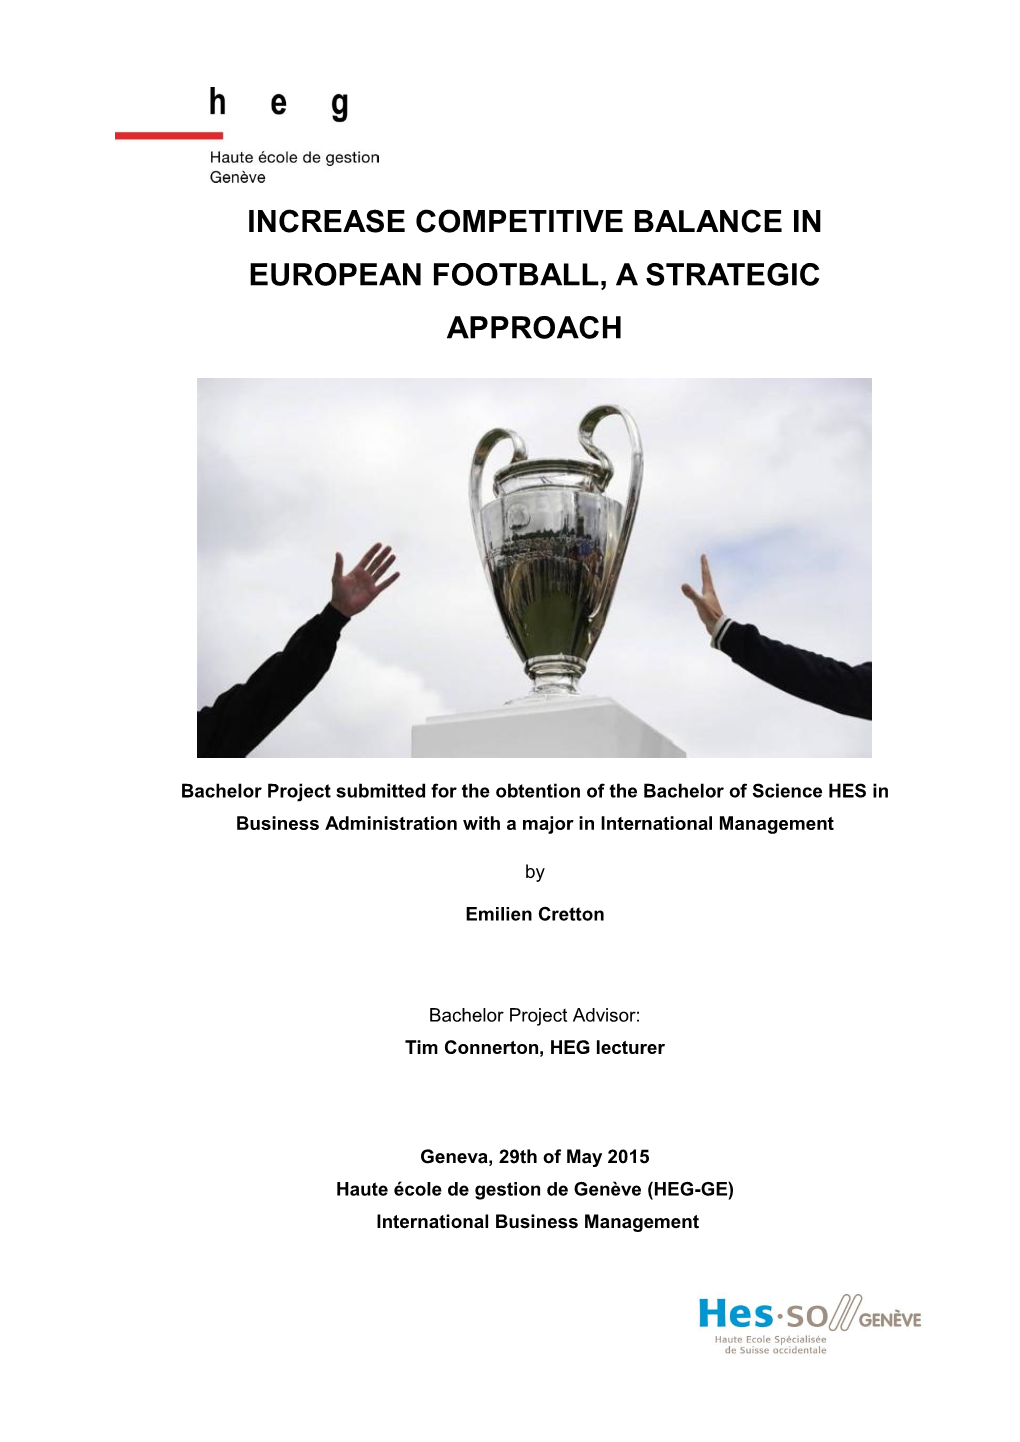 Increase Competitive Balance in European Football, a Strategic Approach